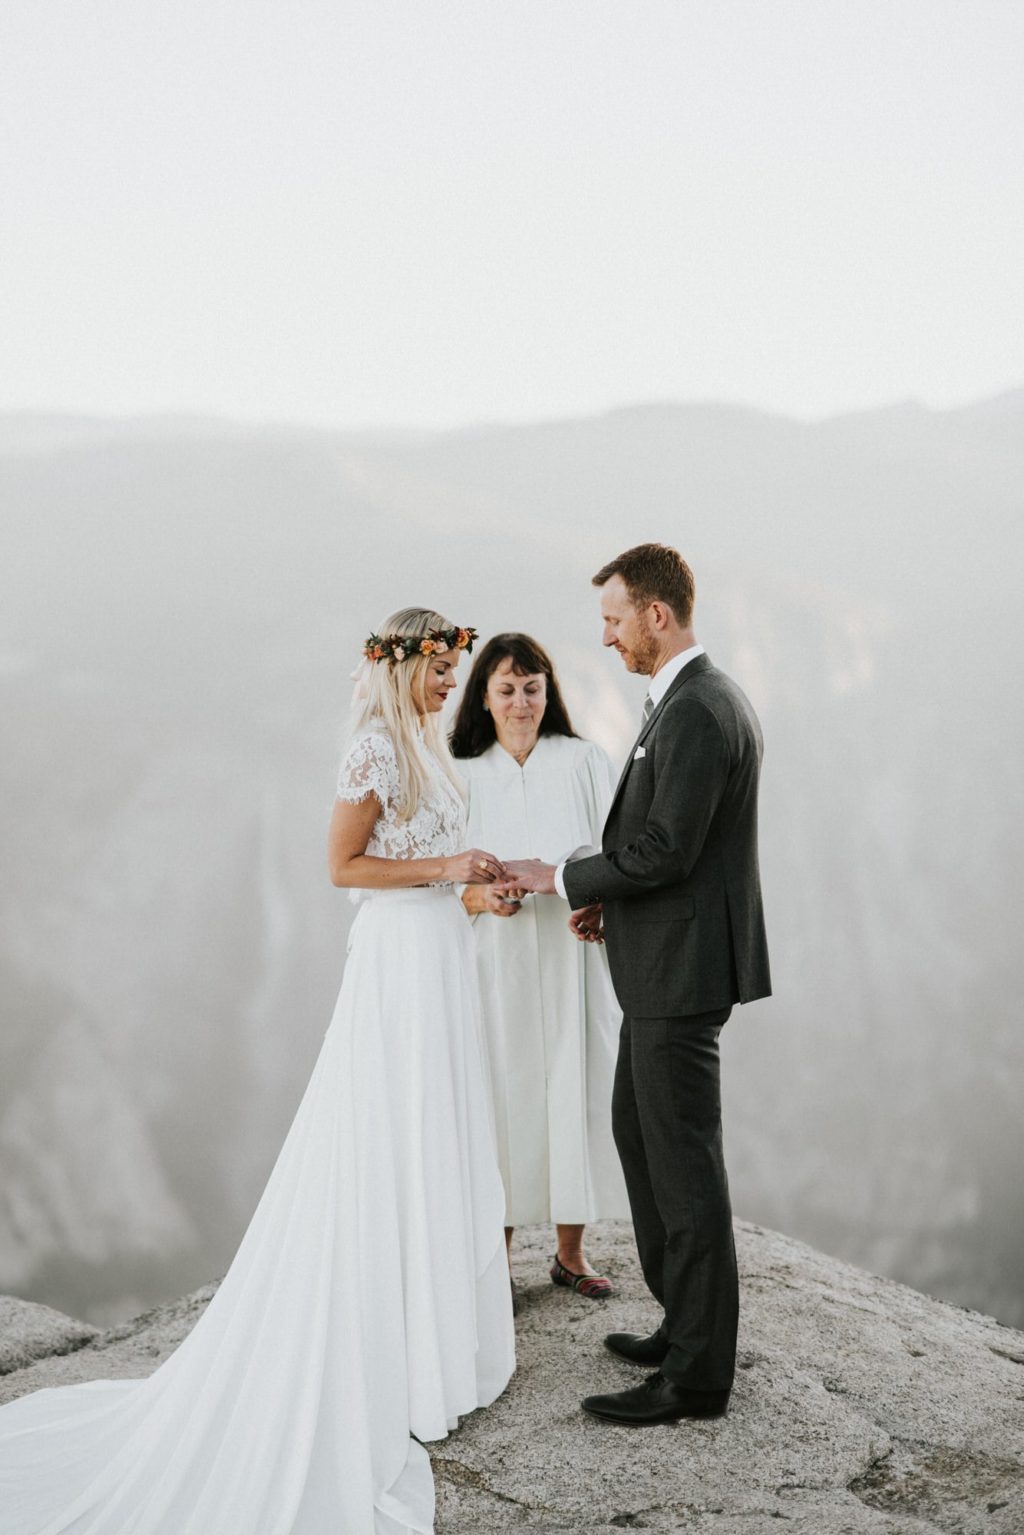 This photo is of a bride and groom exchanging their rings during their elopement at Taft Point